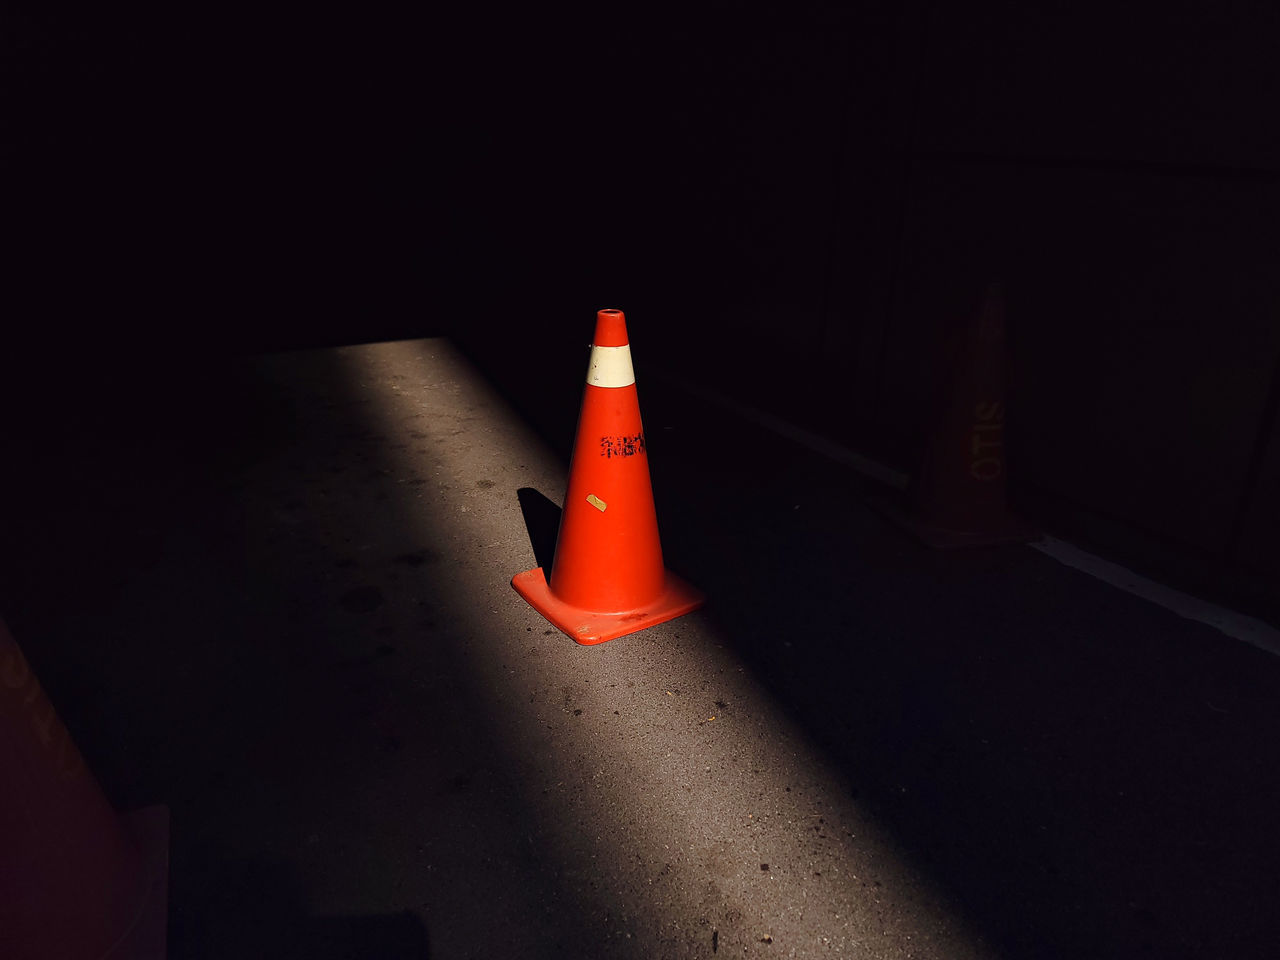 red, darkness, traffic cone, cone, light, night, lighting, sign, no people, guidance, warning sign, security, yellow, communication, protection, road, black, shadow, illuminated, white, orange color, architecture